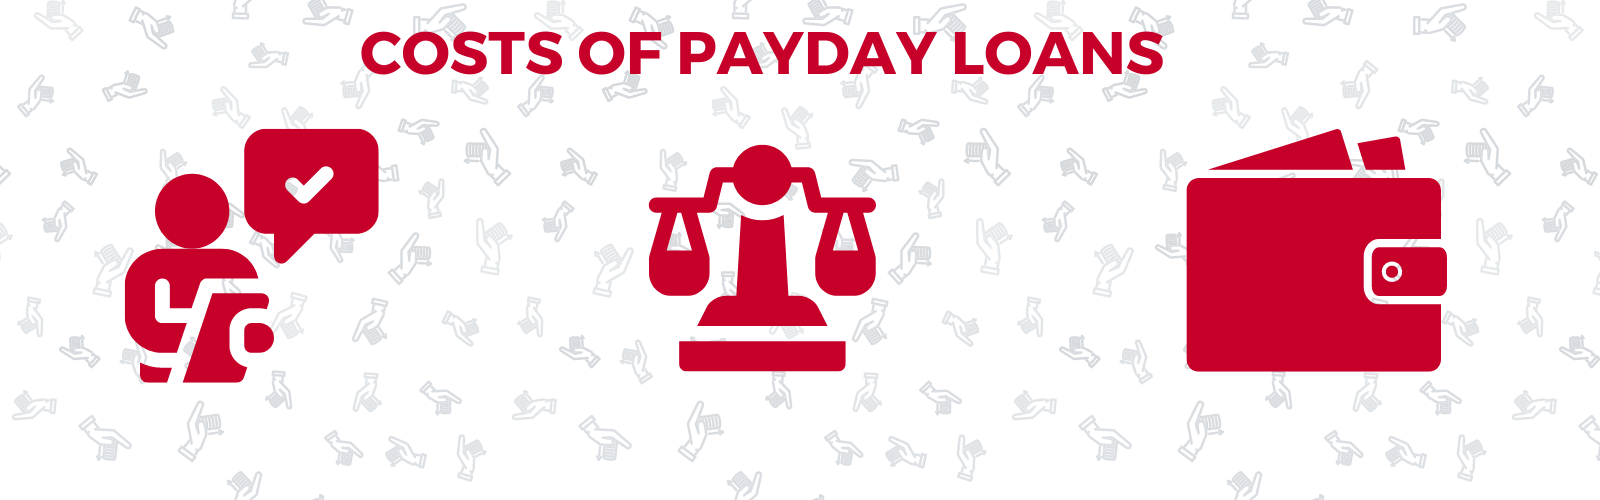 Costs of Payday Loans